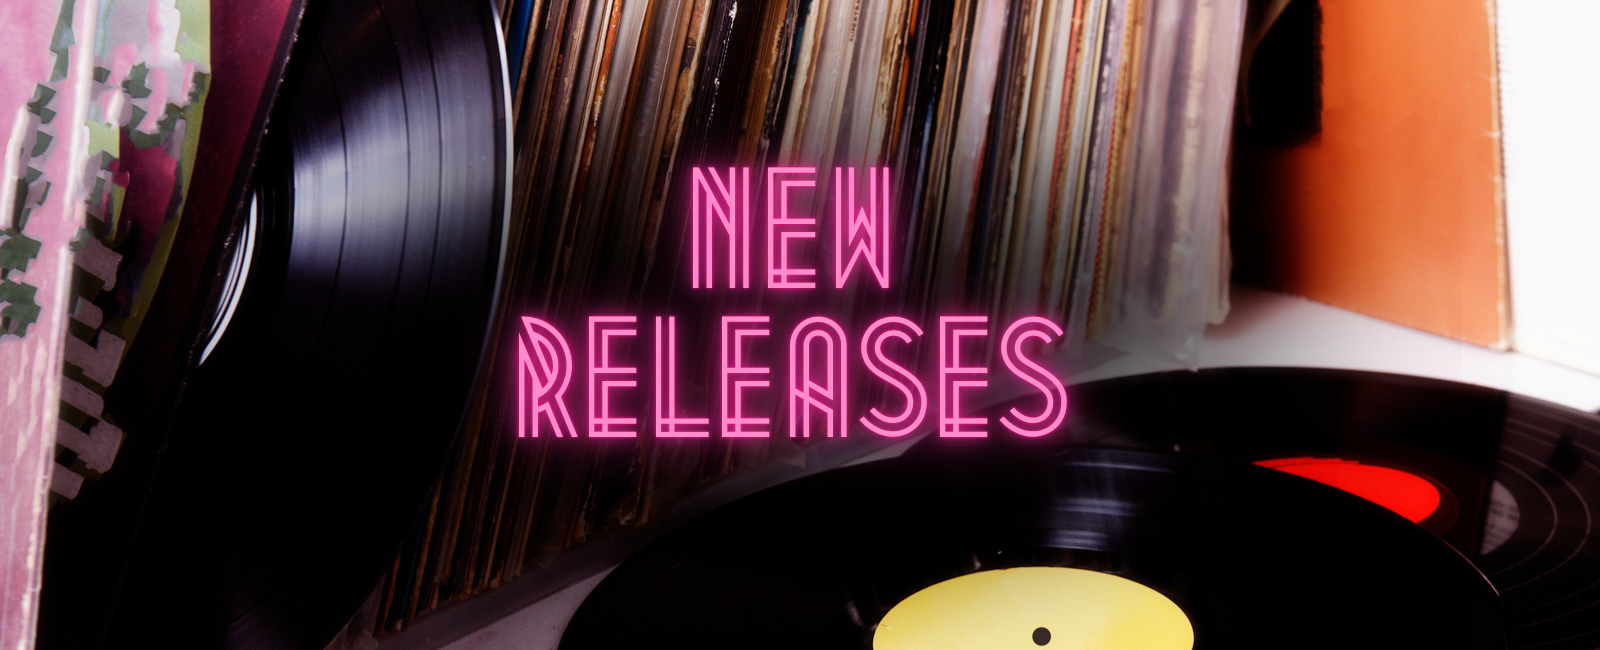 Ananga Martin, Adam Yokum, Jared Henry And Horseburner Have New Releases For Your Weekend!